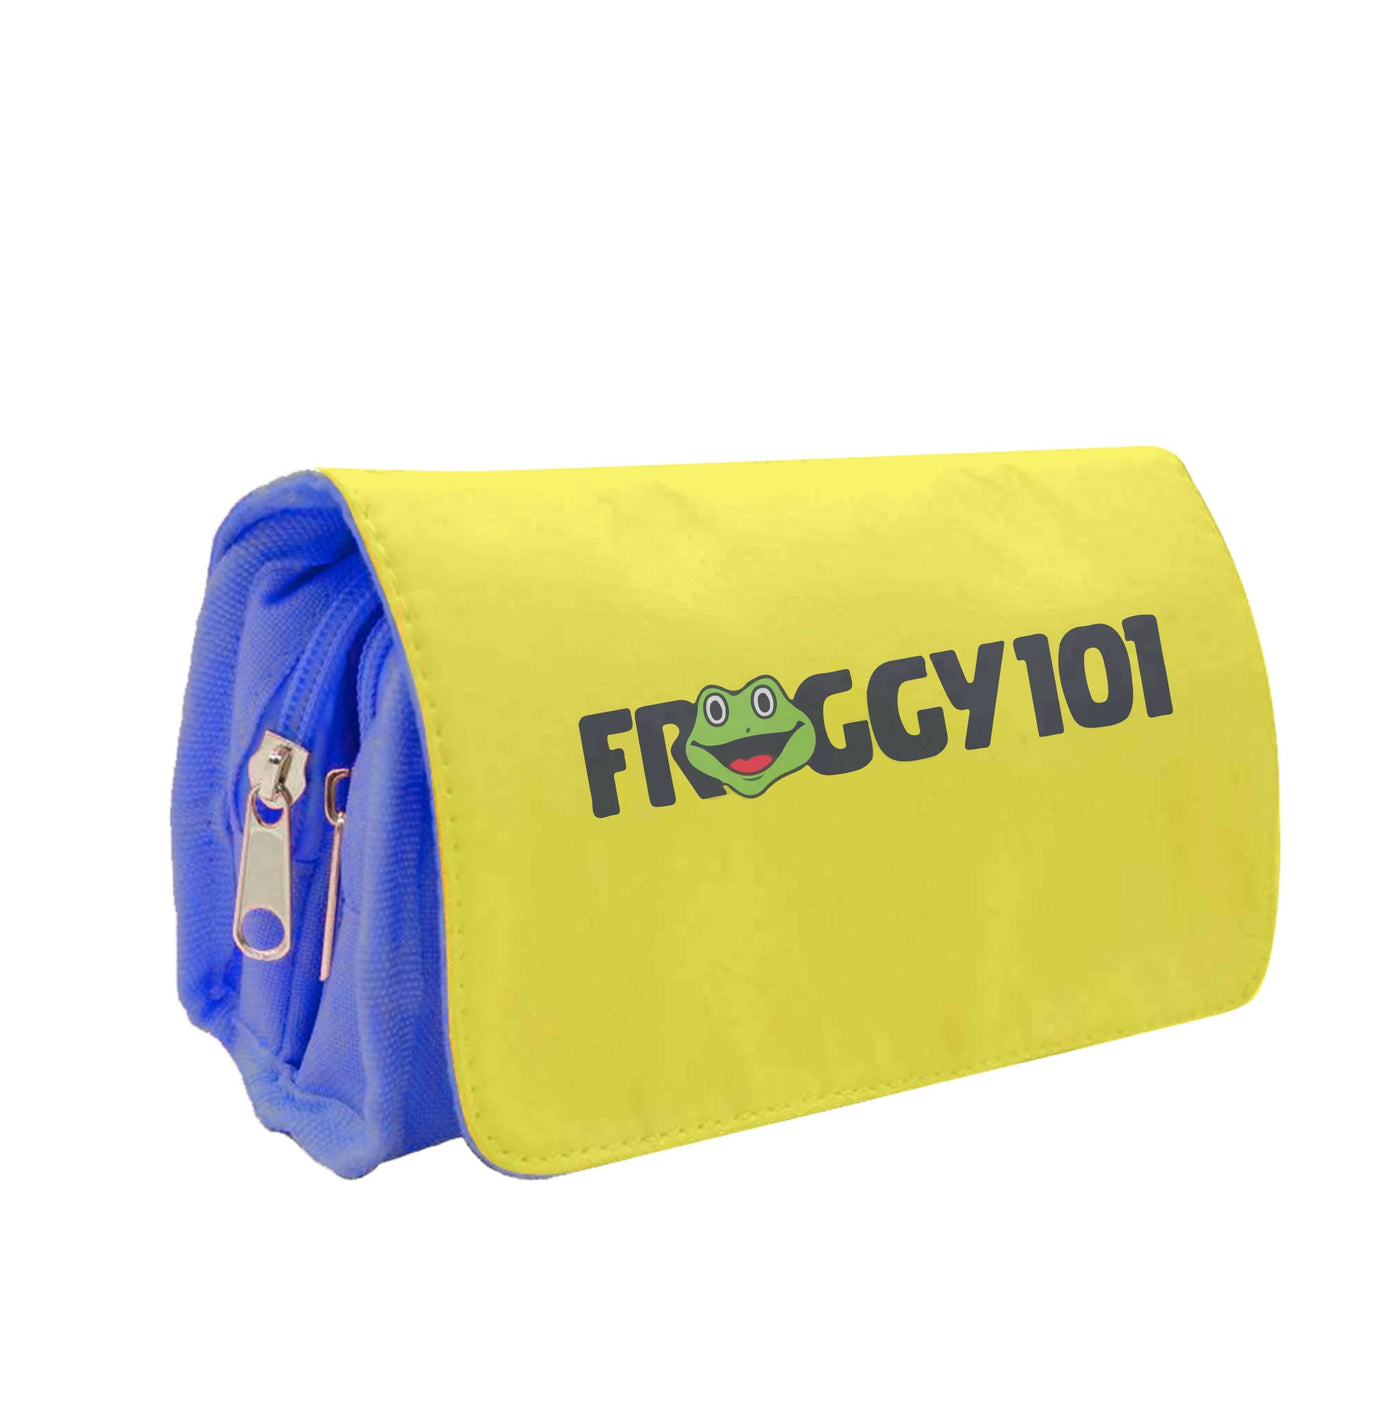 Froggy 101 - The Office Pencil Case